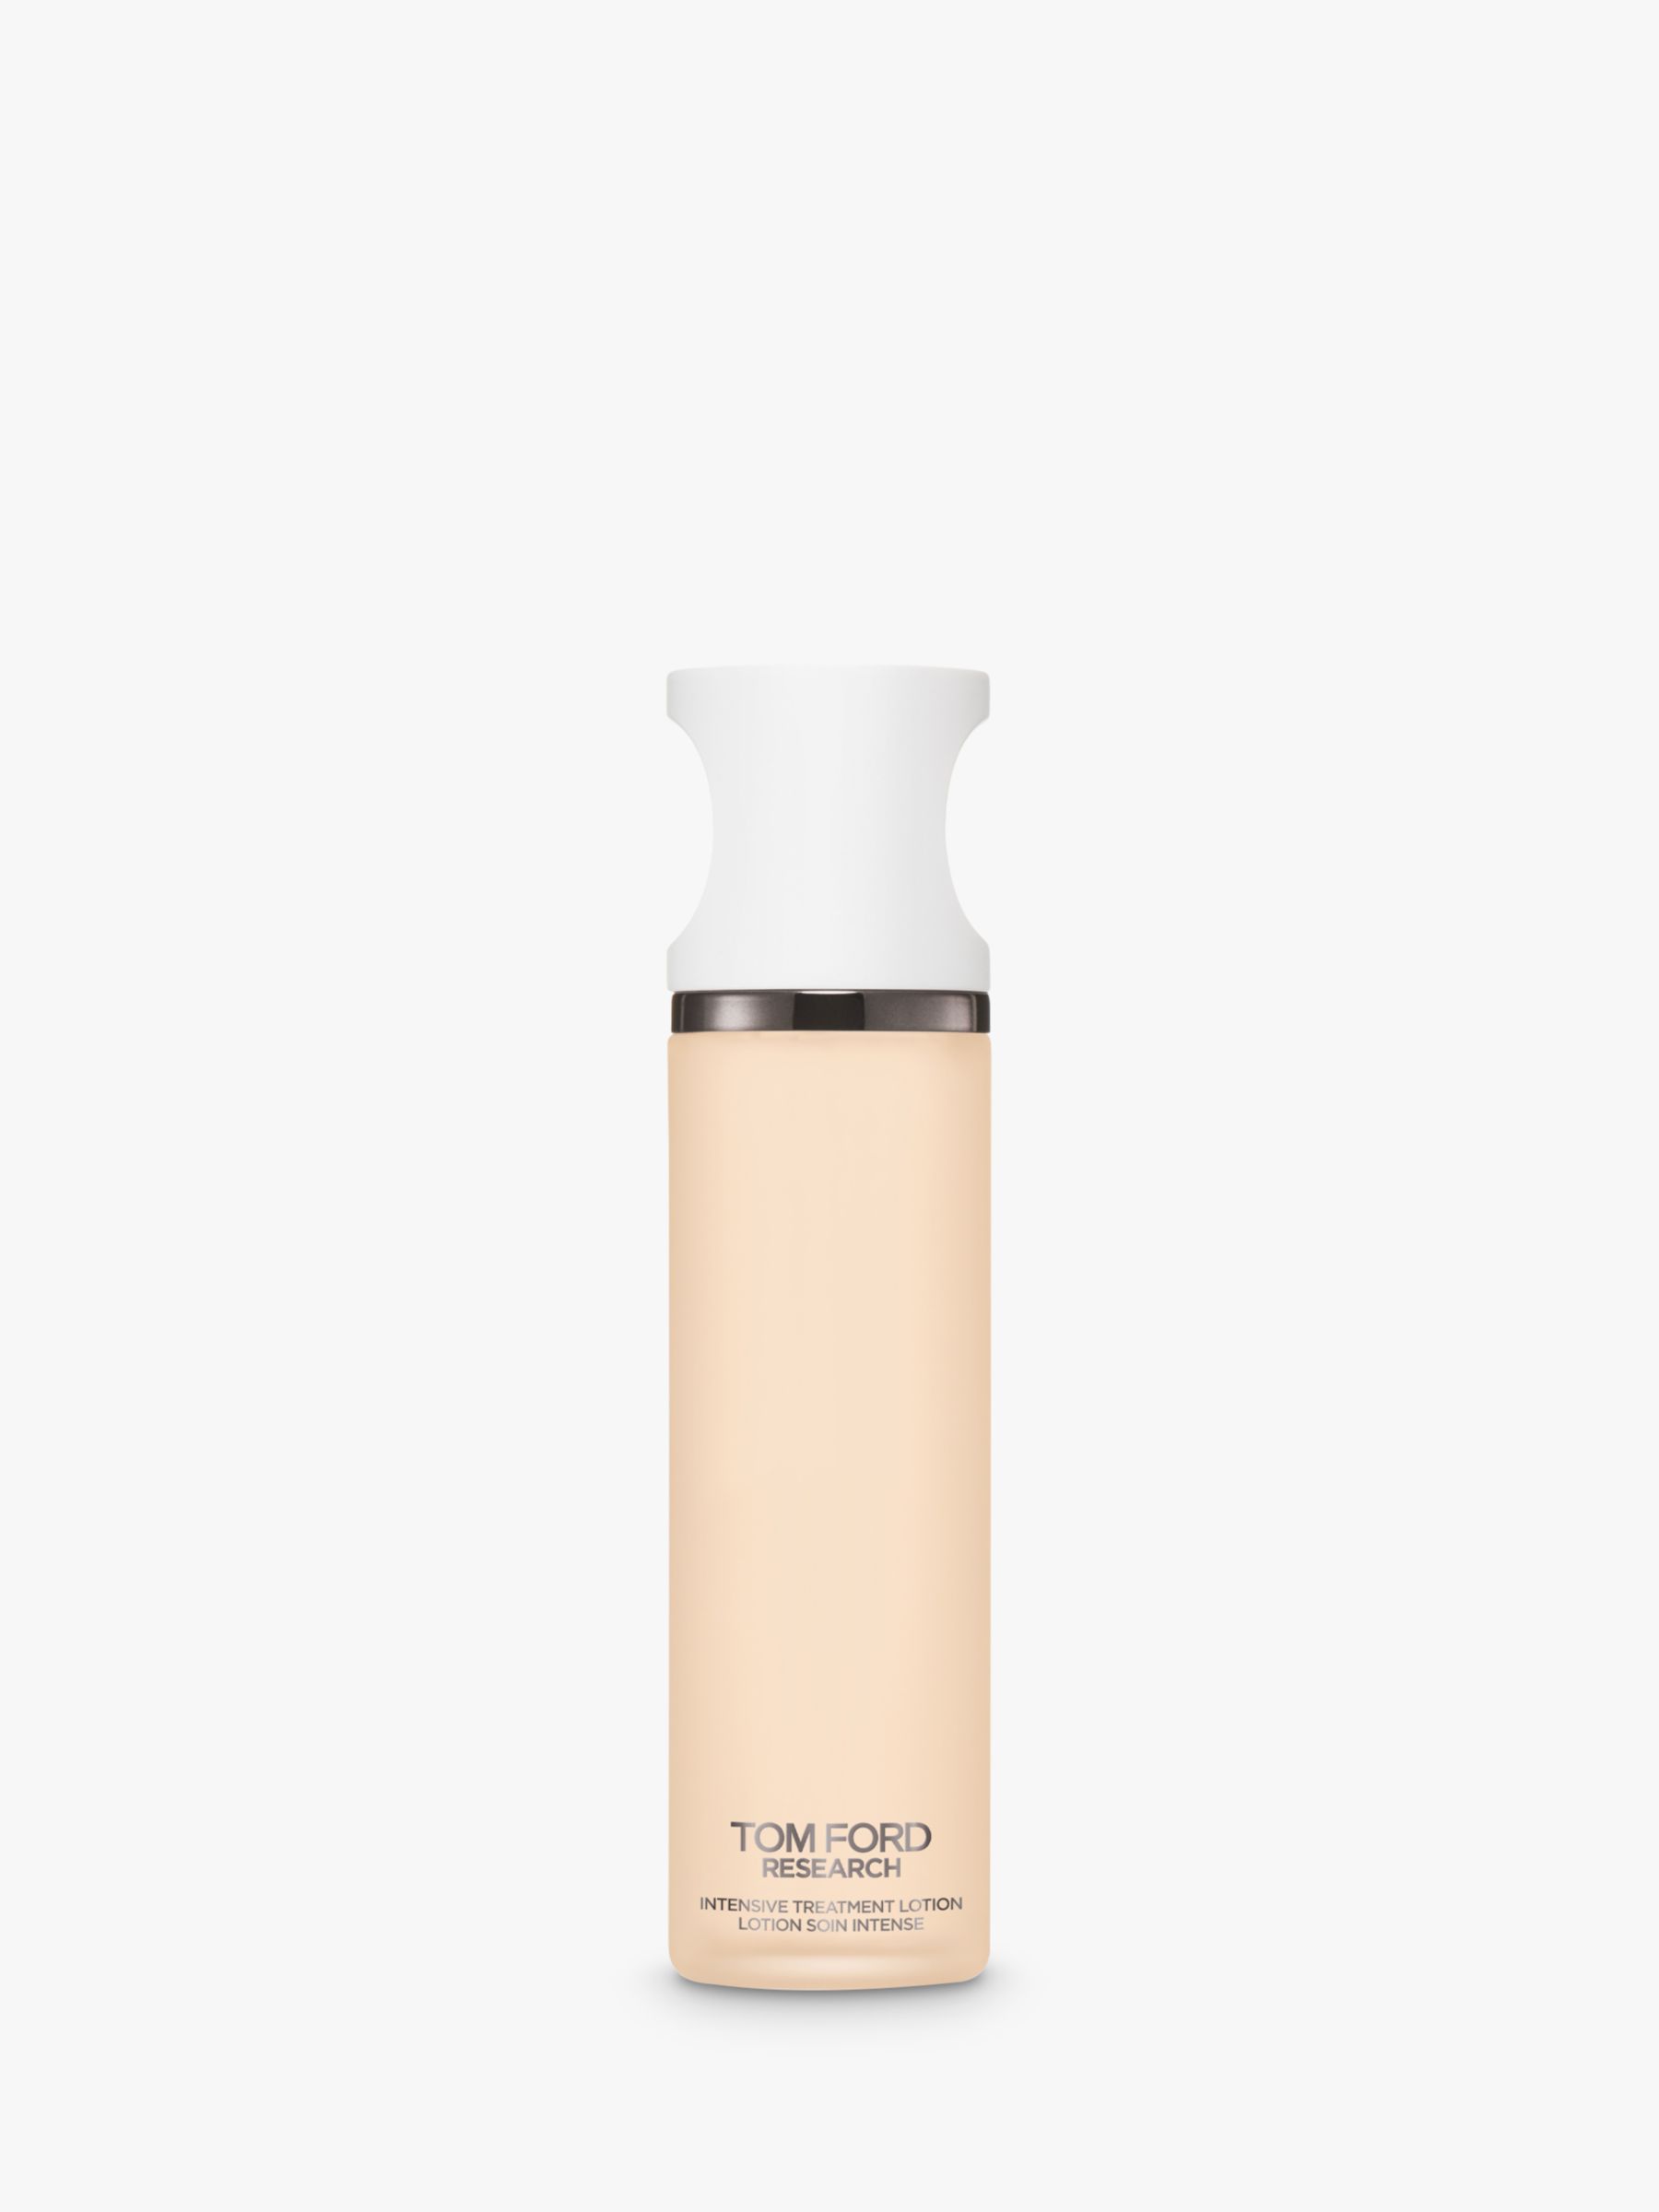 TOM FORD Research Intensive Treatment Lotion, 150ml 1